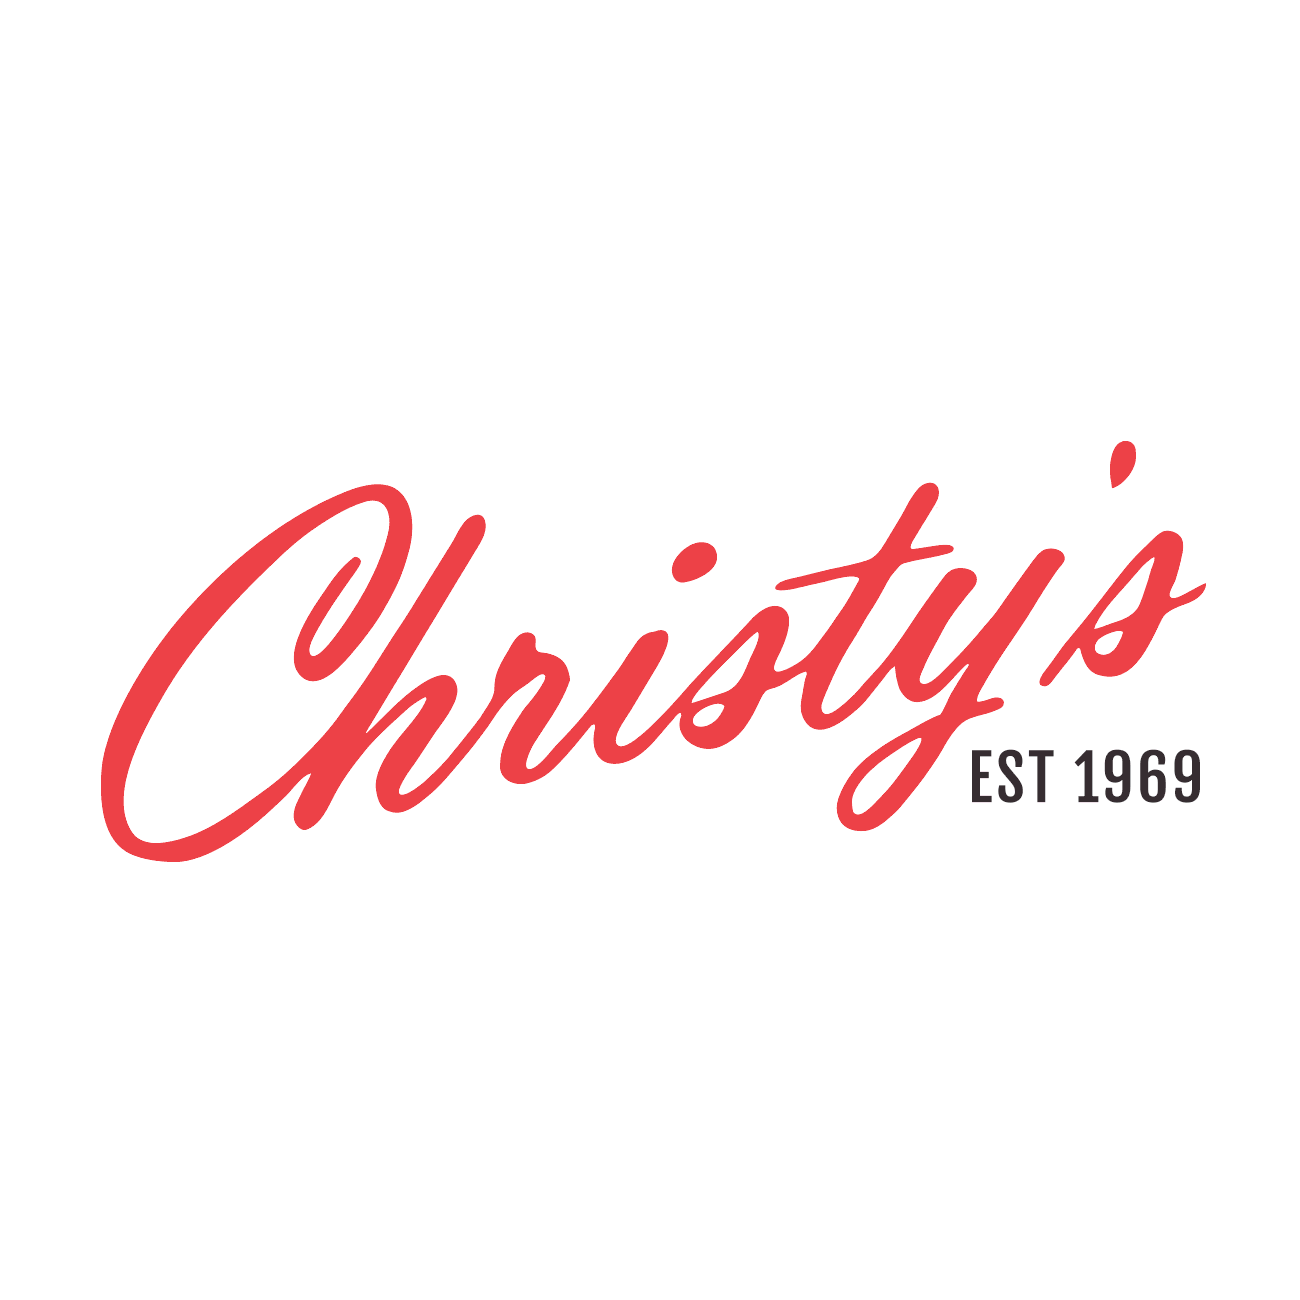 CHRISTY'S - SCENIC ROUTE | Creative Design, Branding, Web and Photography